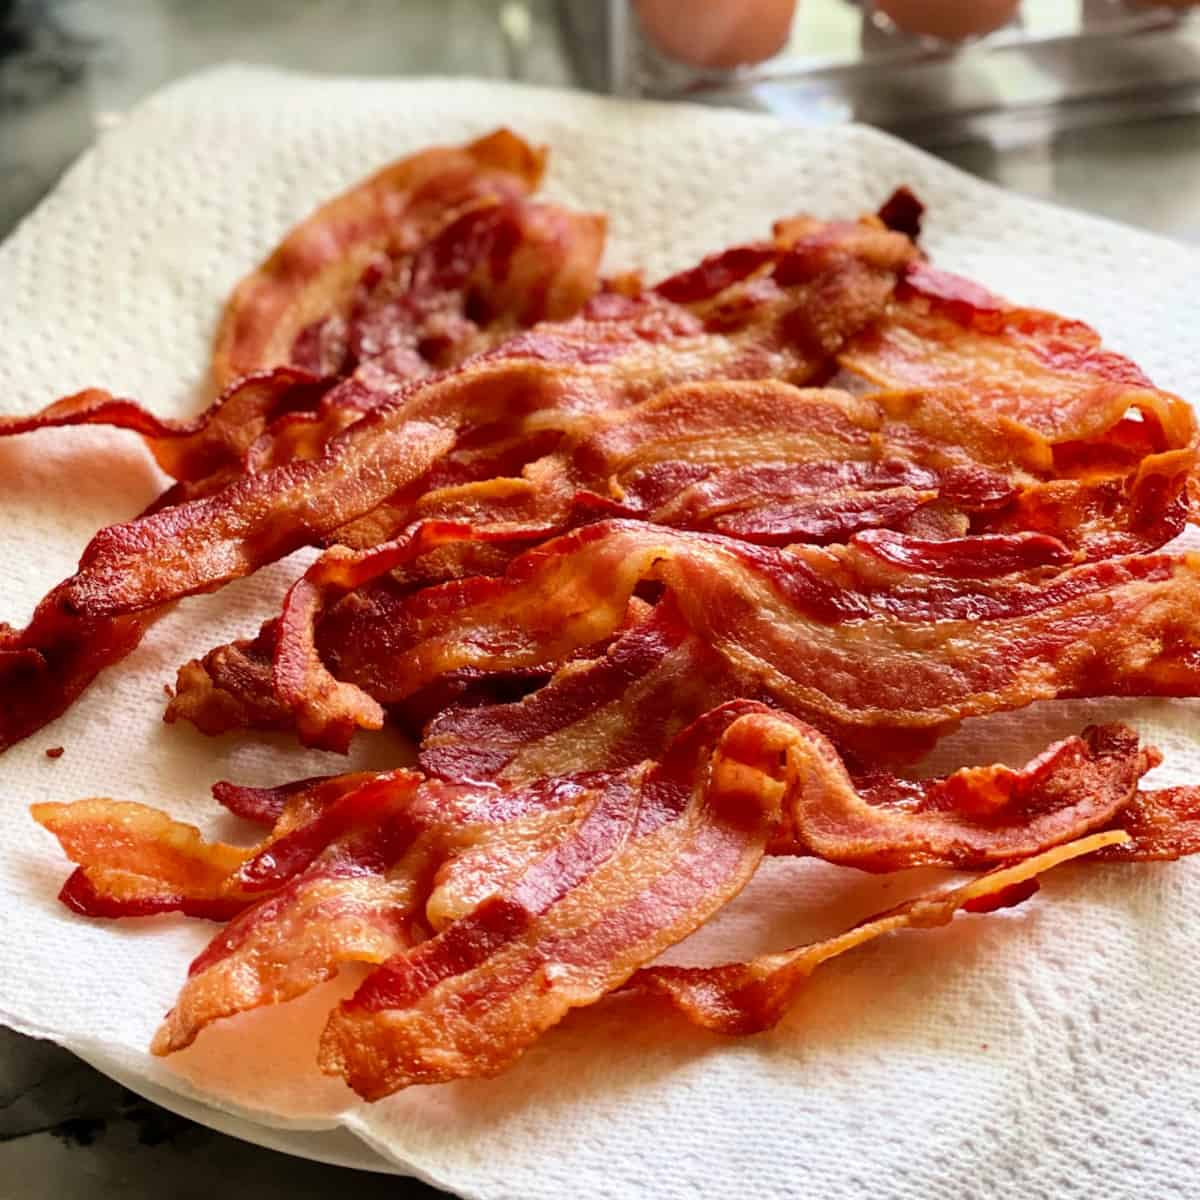 https://www.katiescucina.com/wp-content/uploads/2022/01/Air-Fryer-Bacon-square-1.jpg